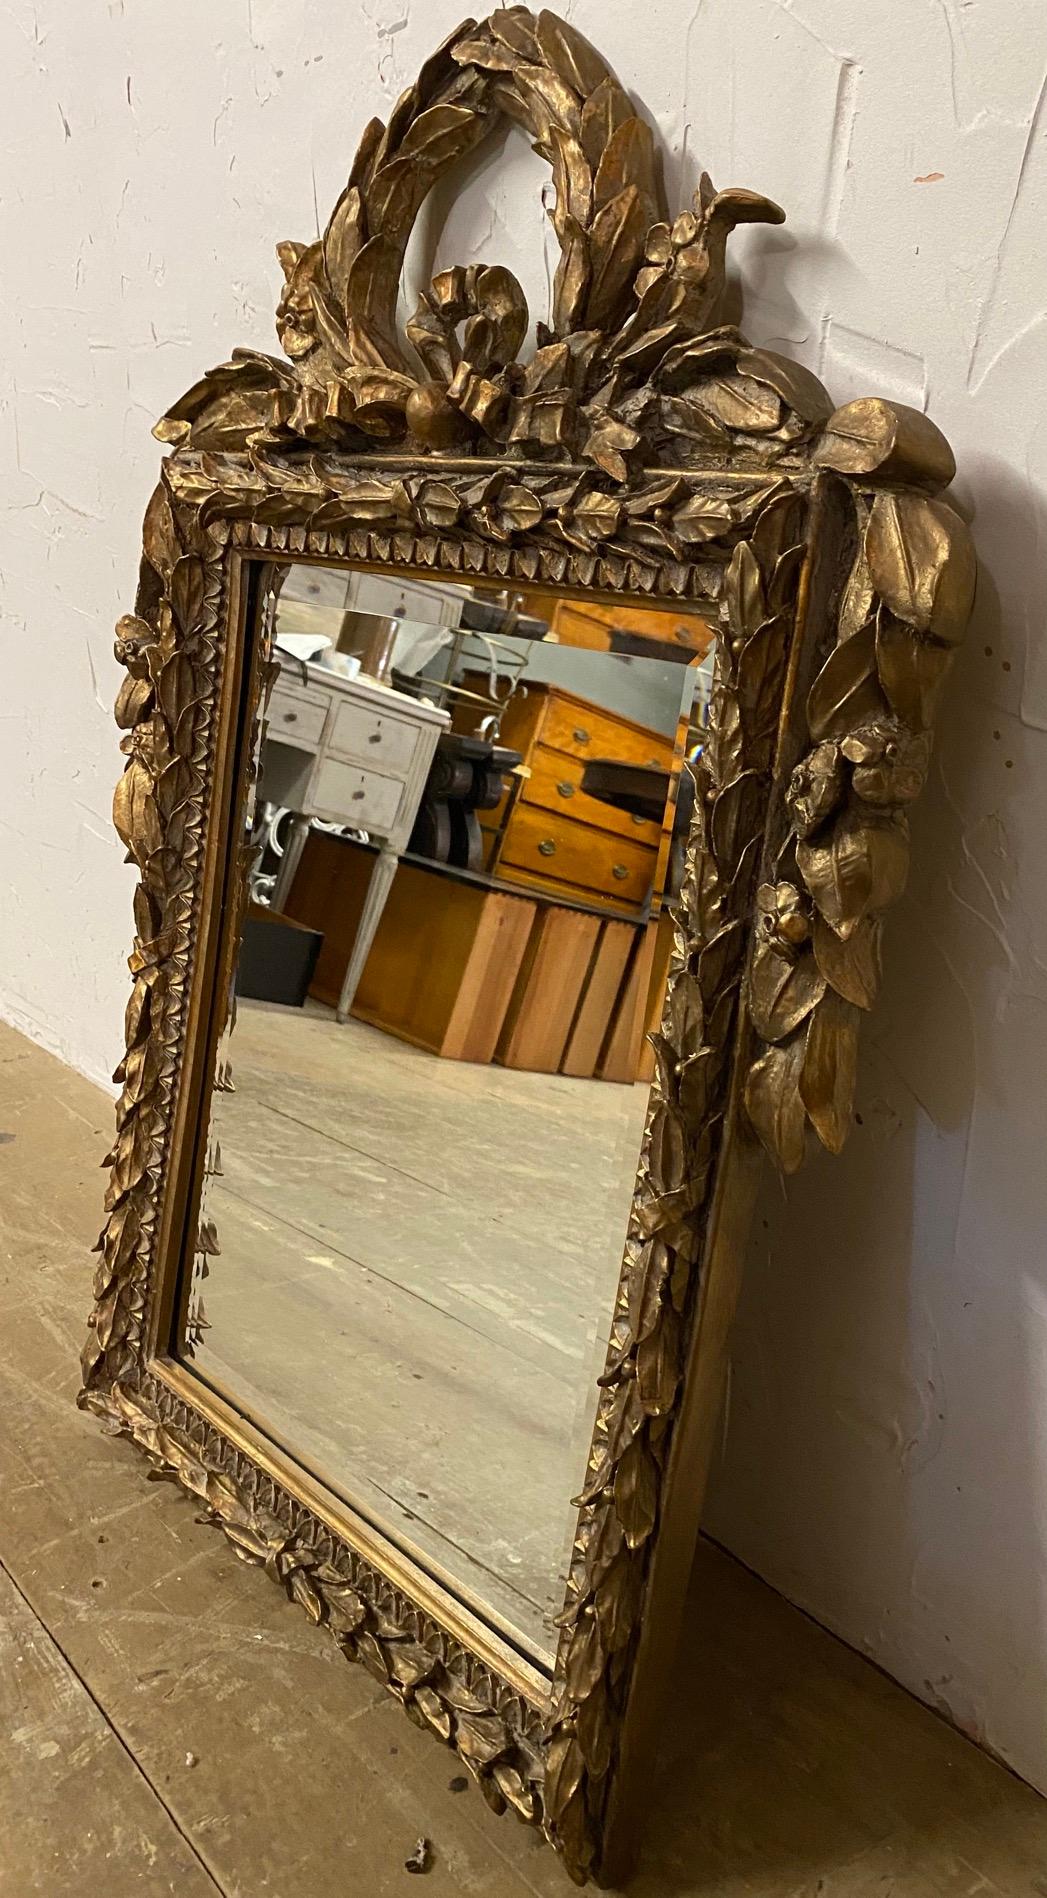 A charming vintage French Louis XVI style gilt wood wall mirror. The top has wonderful gilt carving topped with a crown of laurel wreath. This elegant mirror would make a charming addition to a living room, powder room, hallway or entry foyer. The